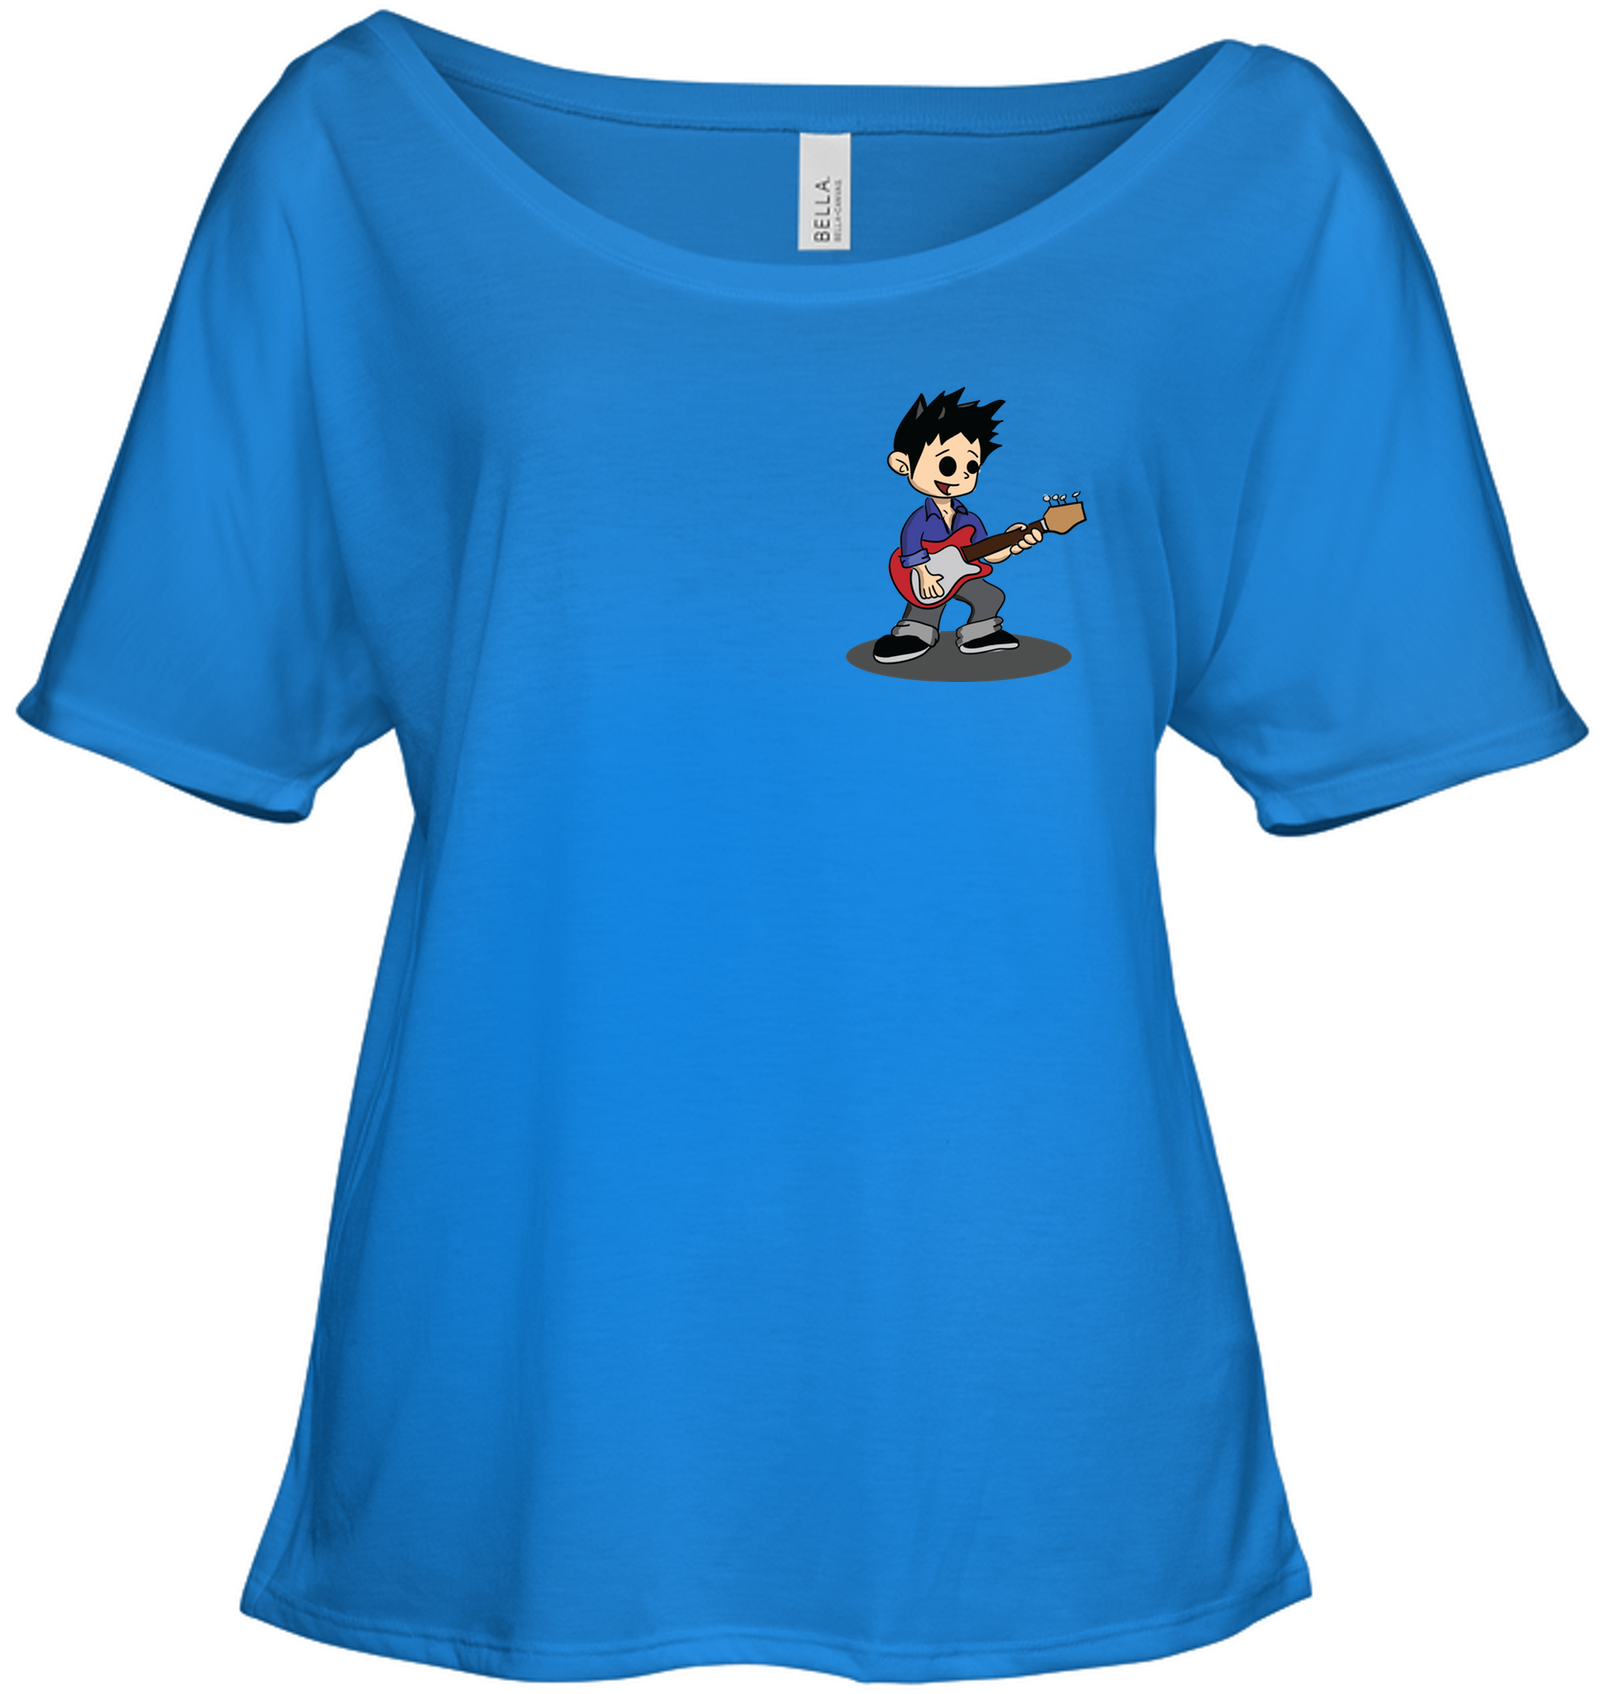 Boy Playing Guitar (Pocket Size) - Bella + Canvas Women's Slouchy Tee